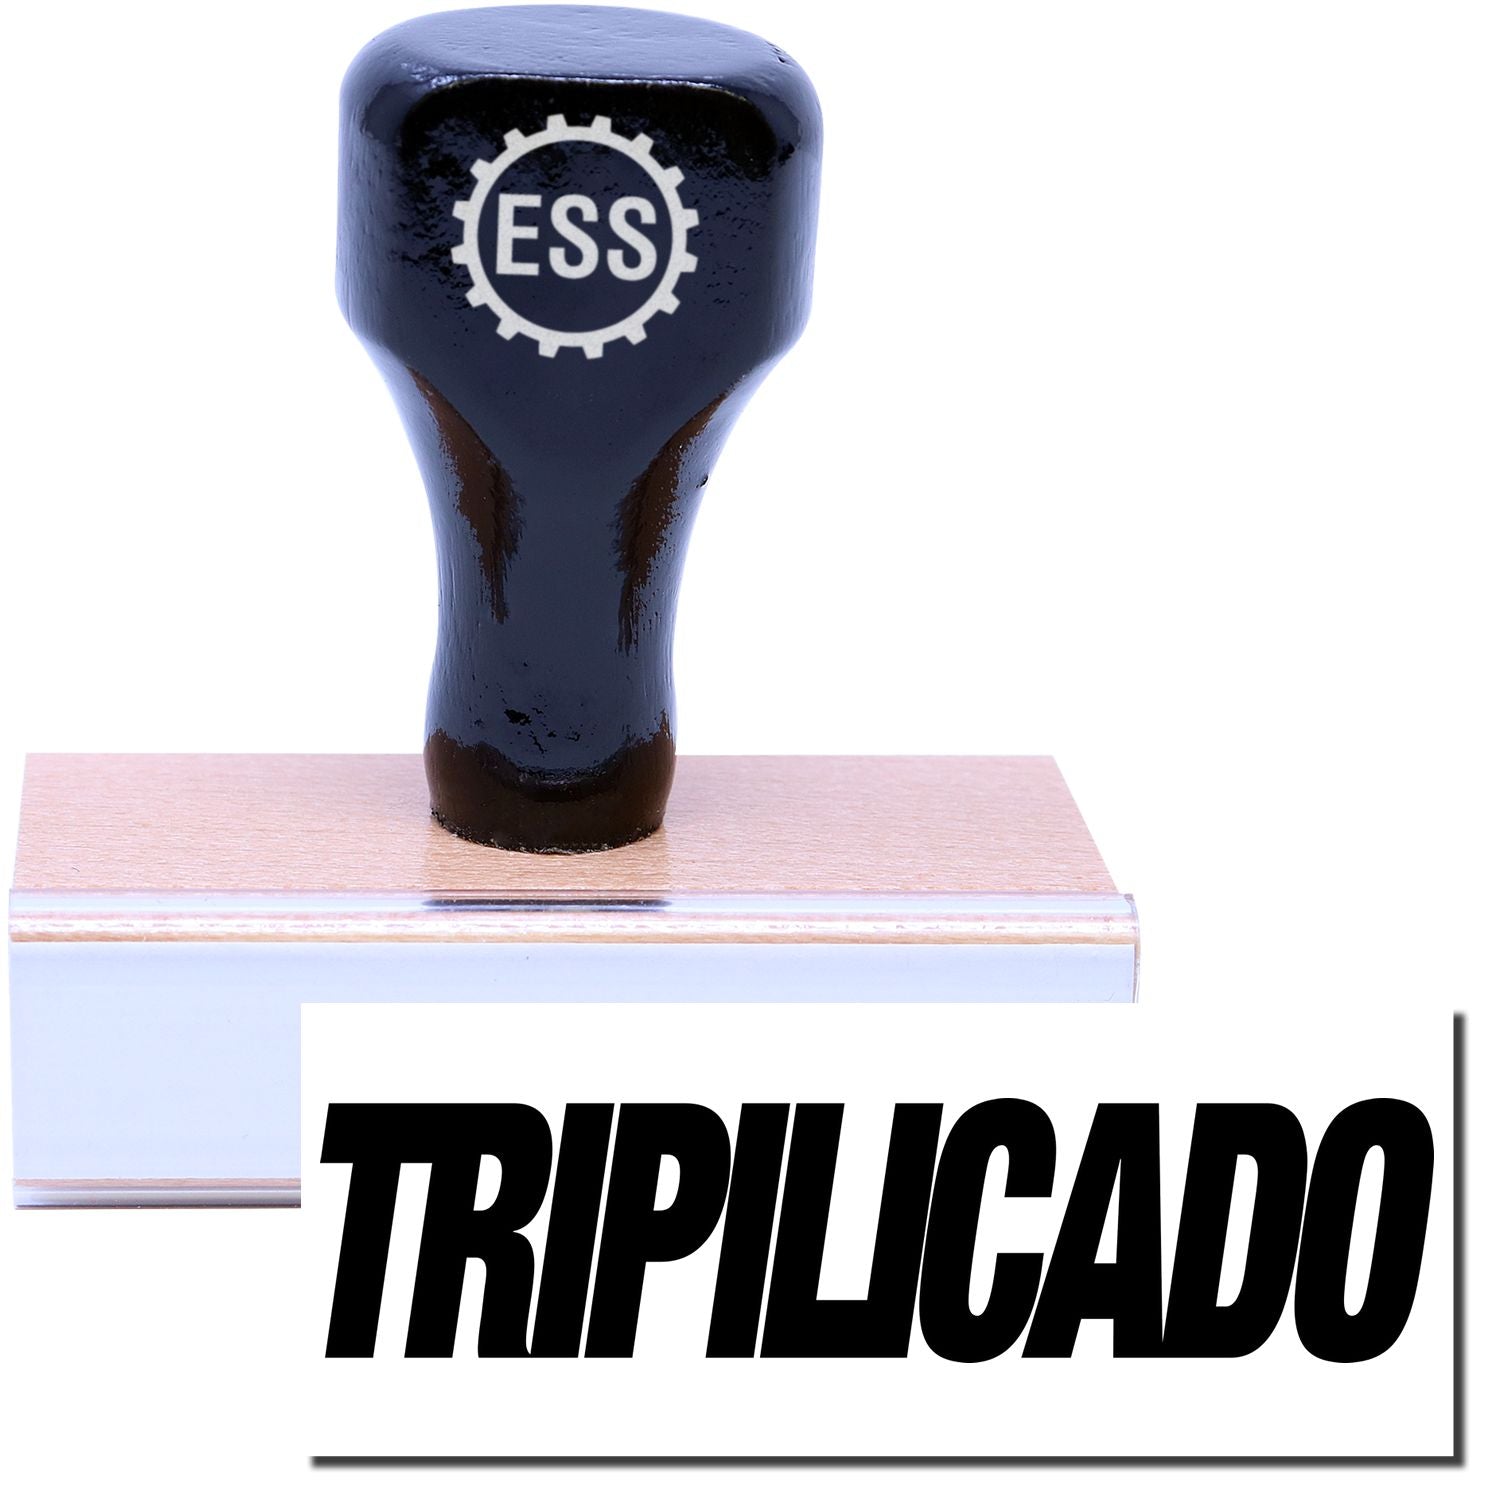 A stock office rubber stamp with a stamped image showing how the text "TRIPILICADO" in a large font is displayed after stamping.